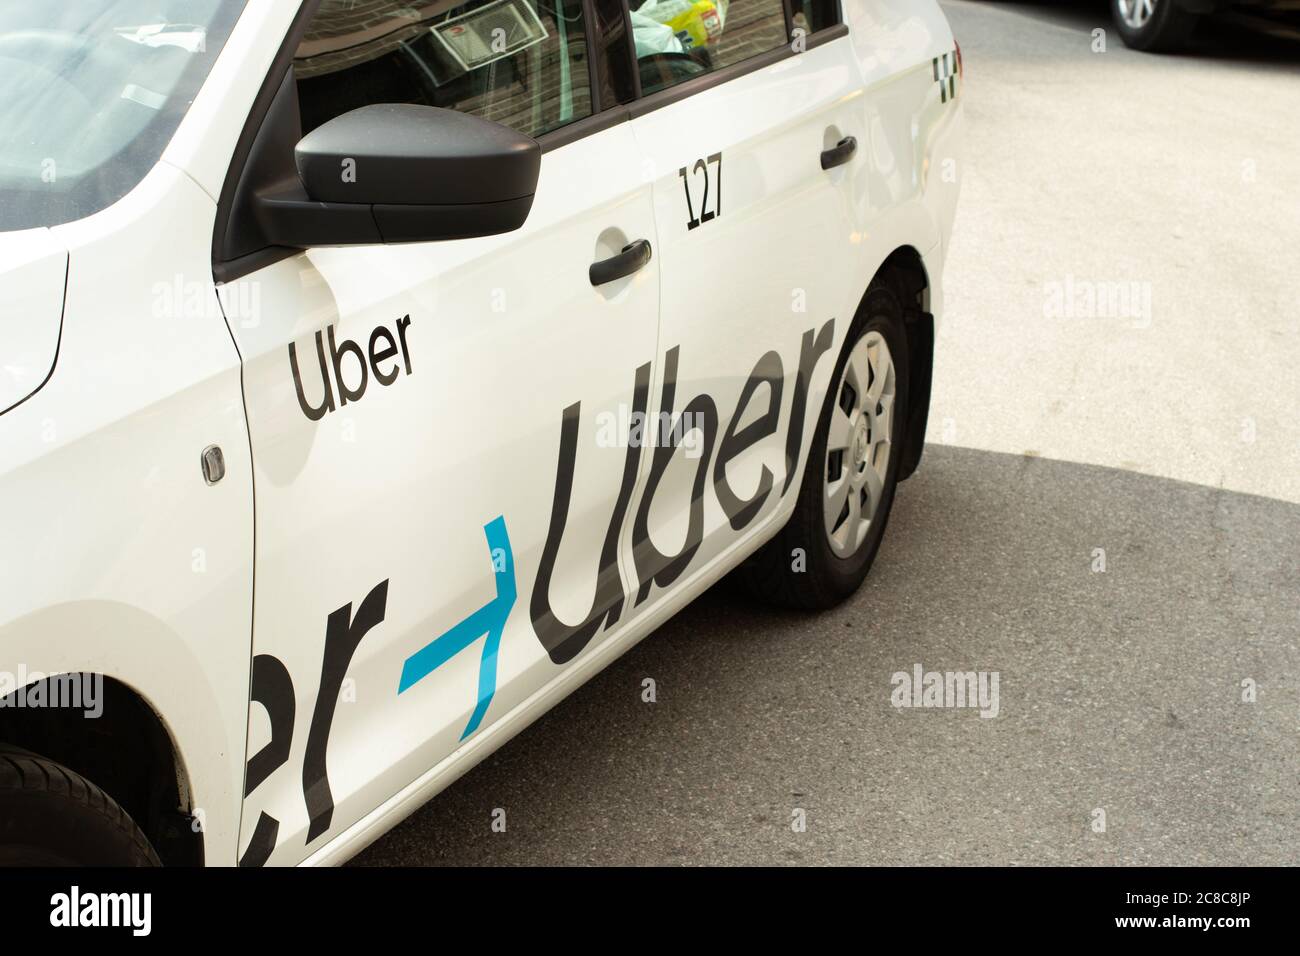 Moscow, Russia - 1 June 2020: Uber app taxi on street with logo , Illustrative Editorial Stock Photo